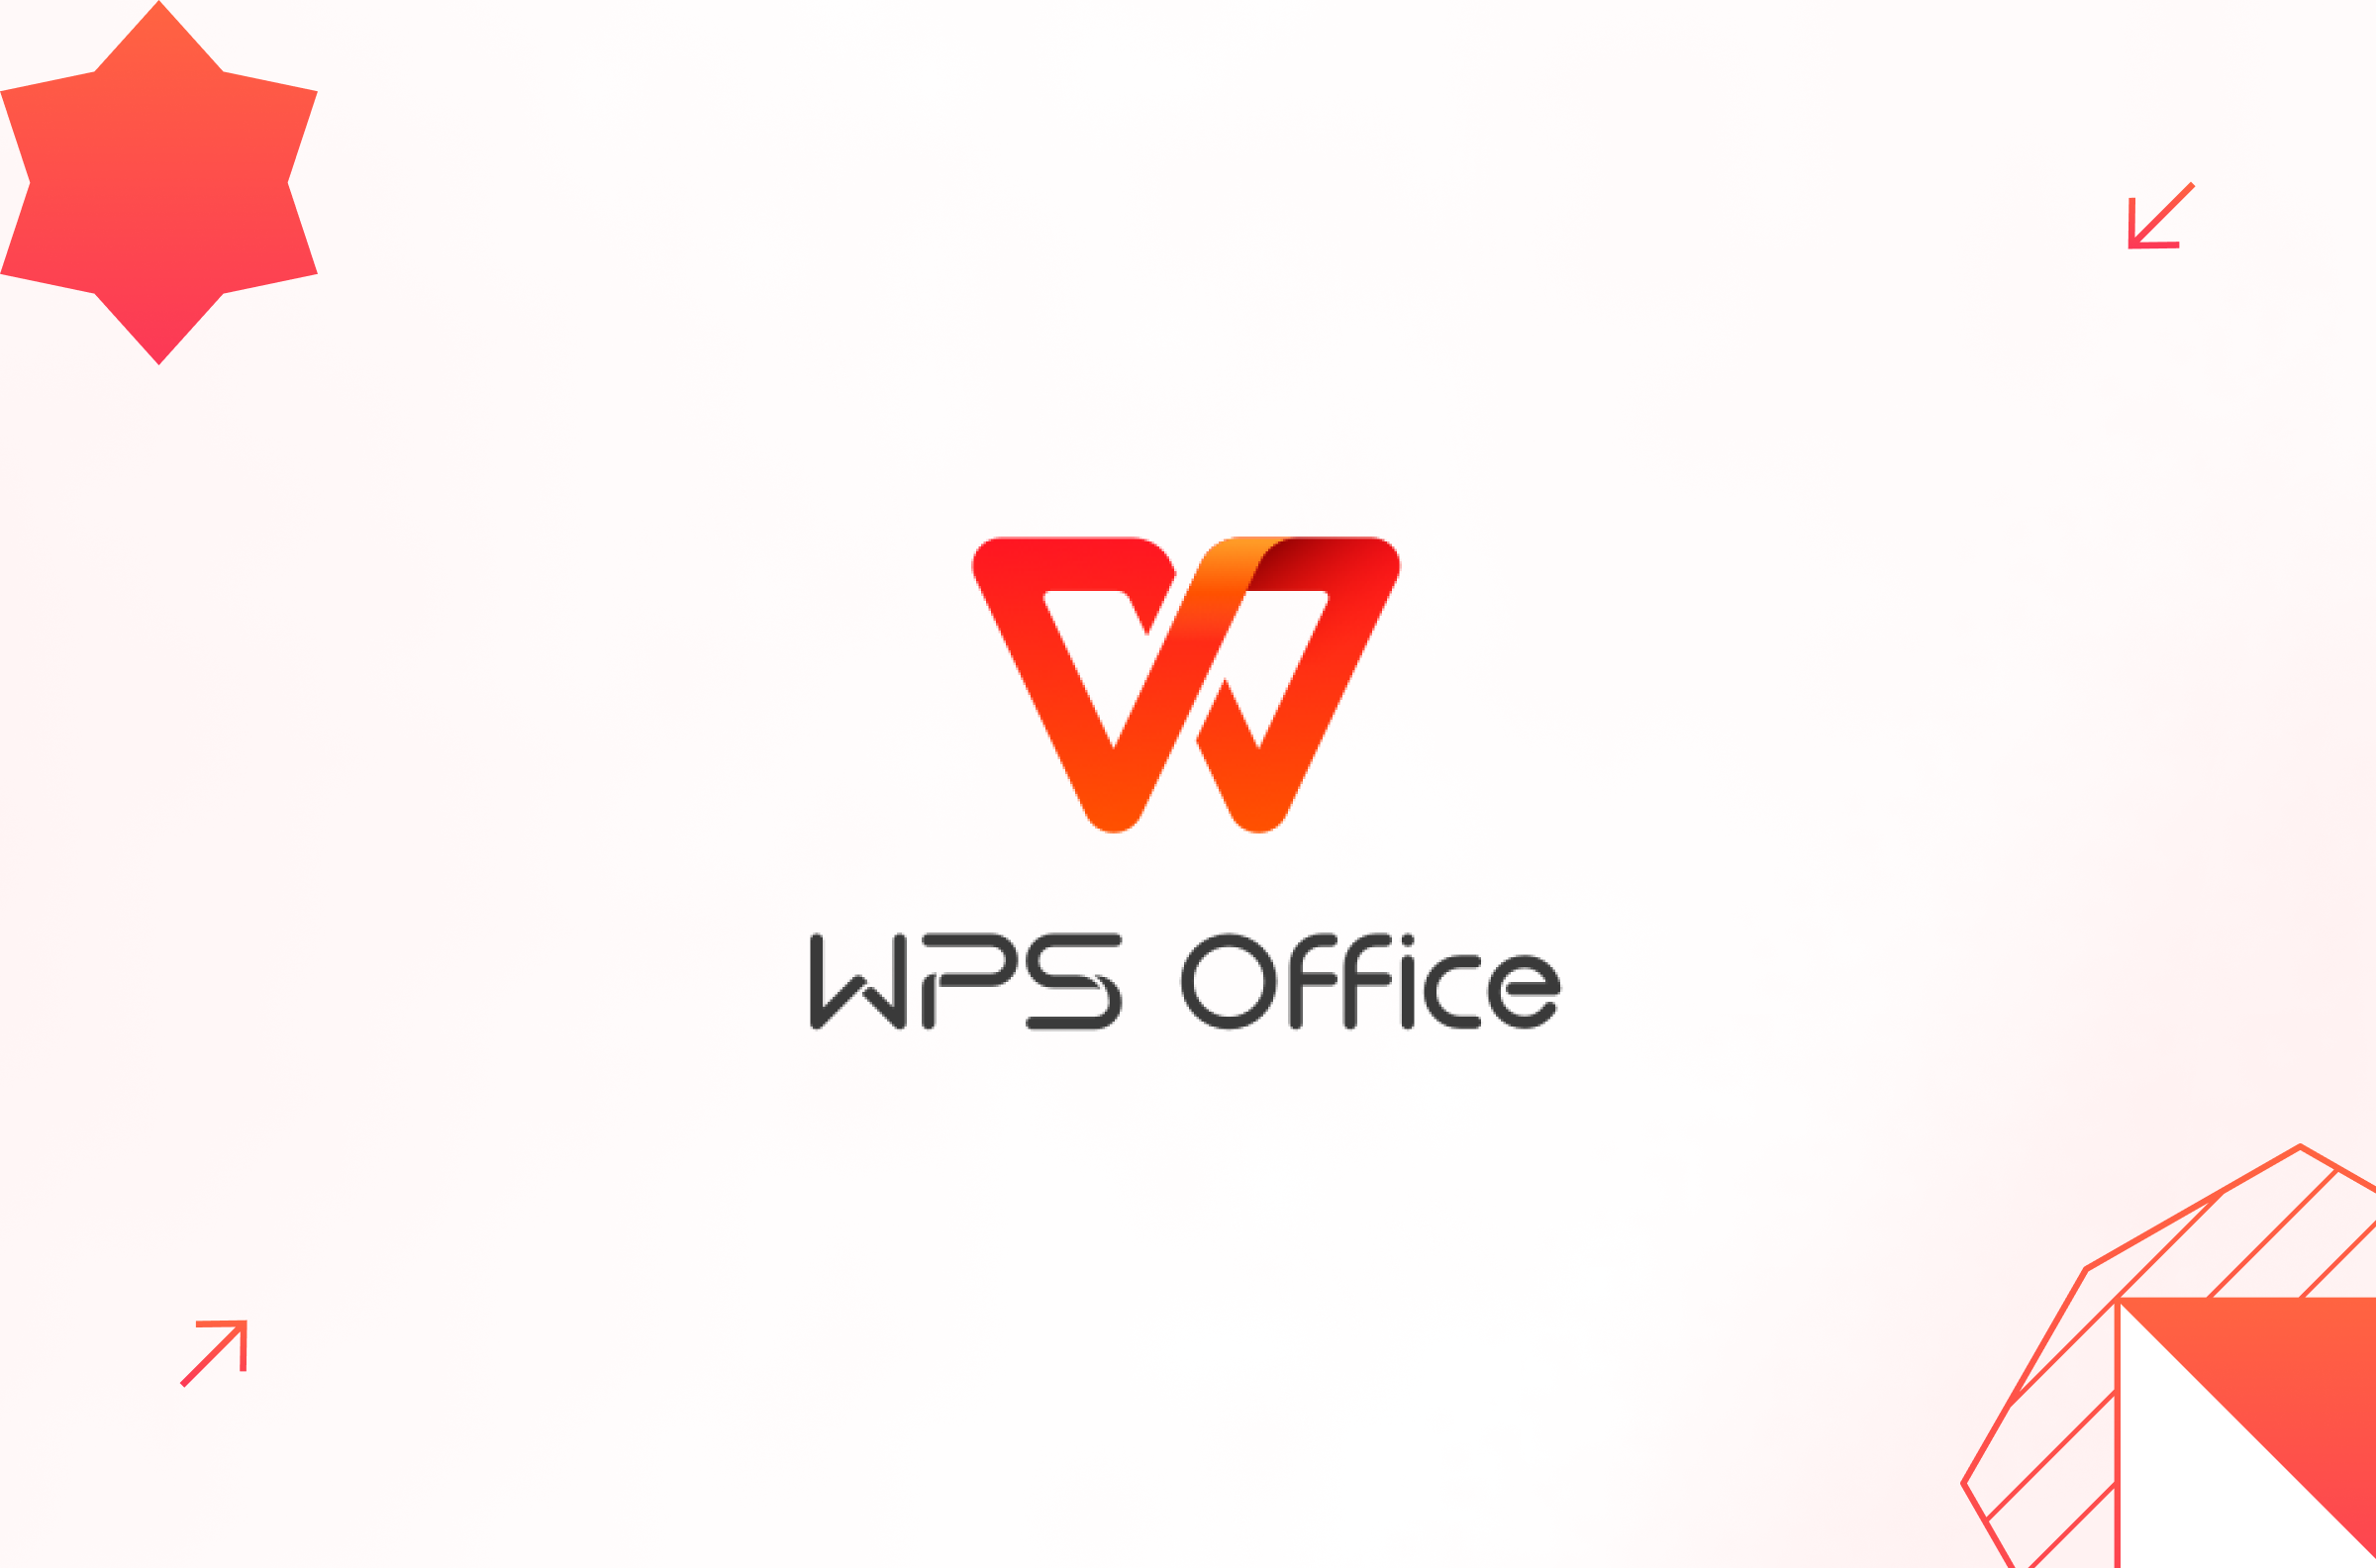 Apache APISIX Fuels WPS Office to Handle Millions of QPS with Ease